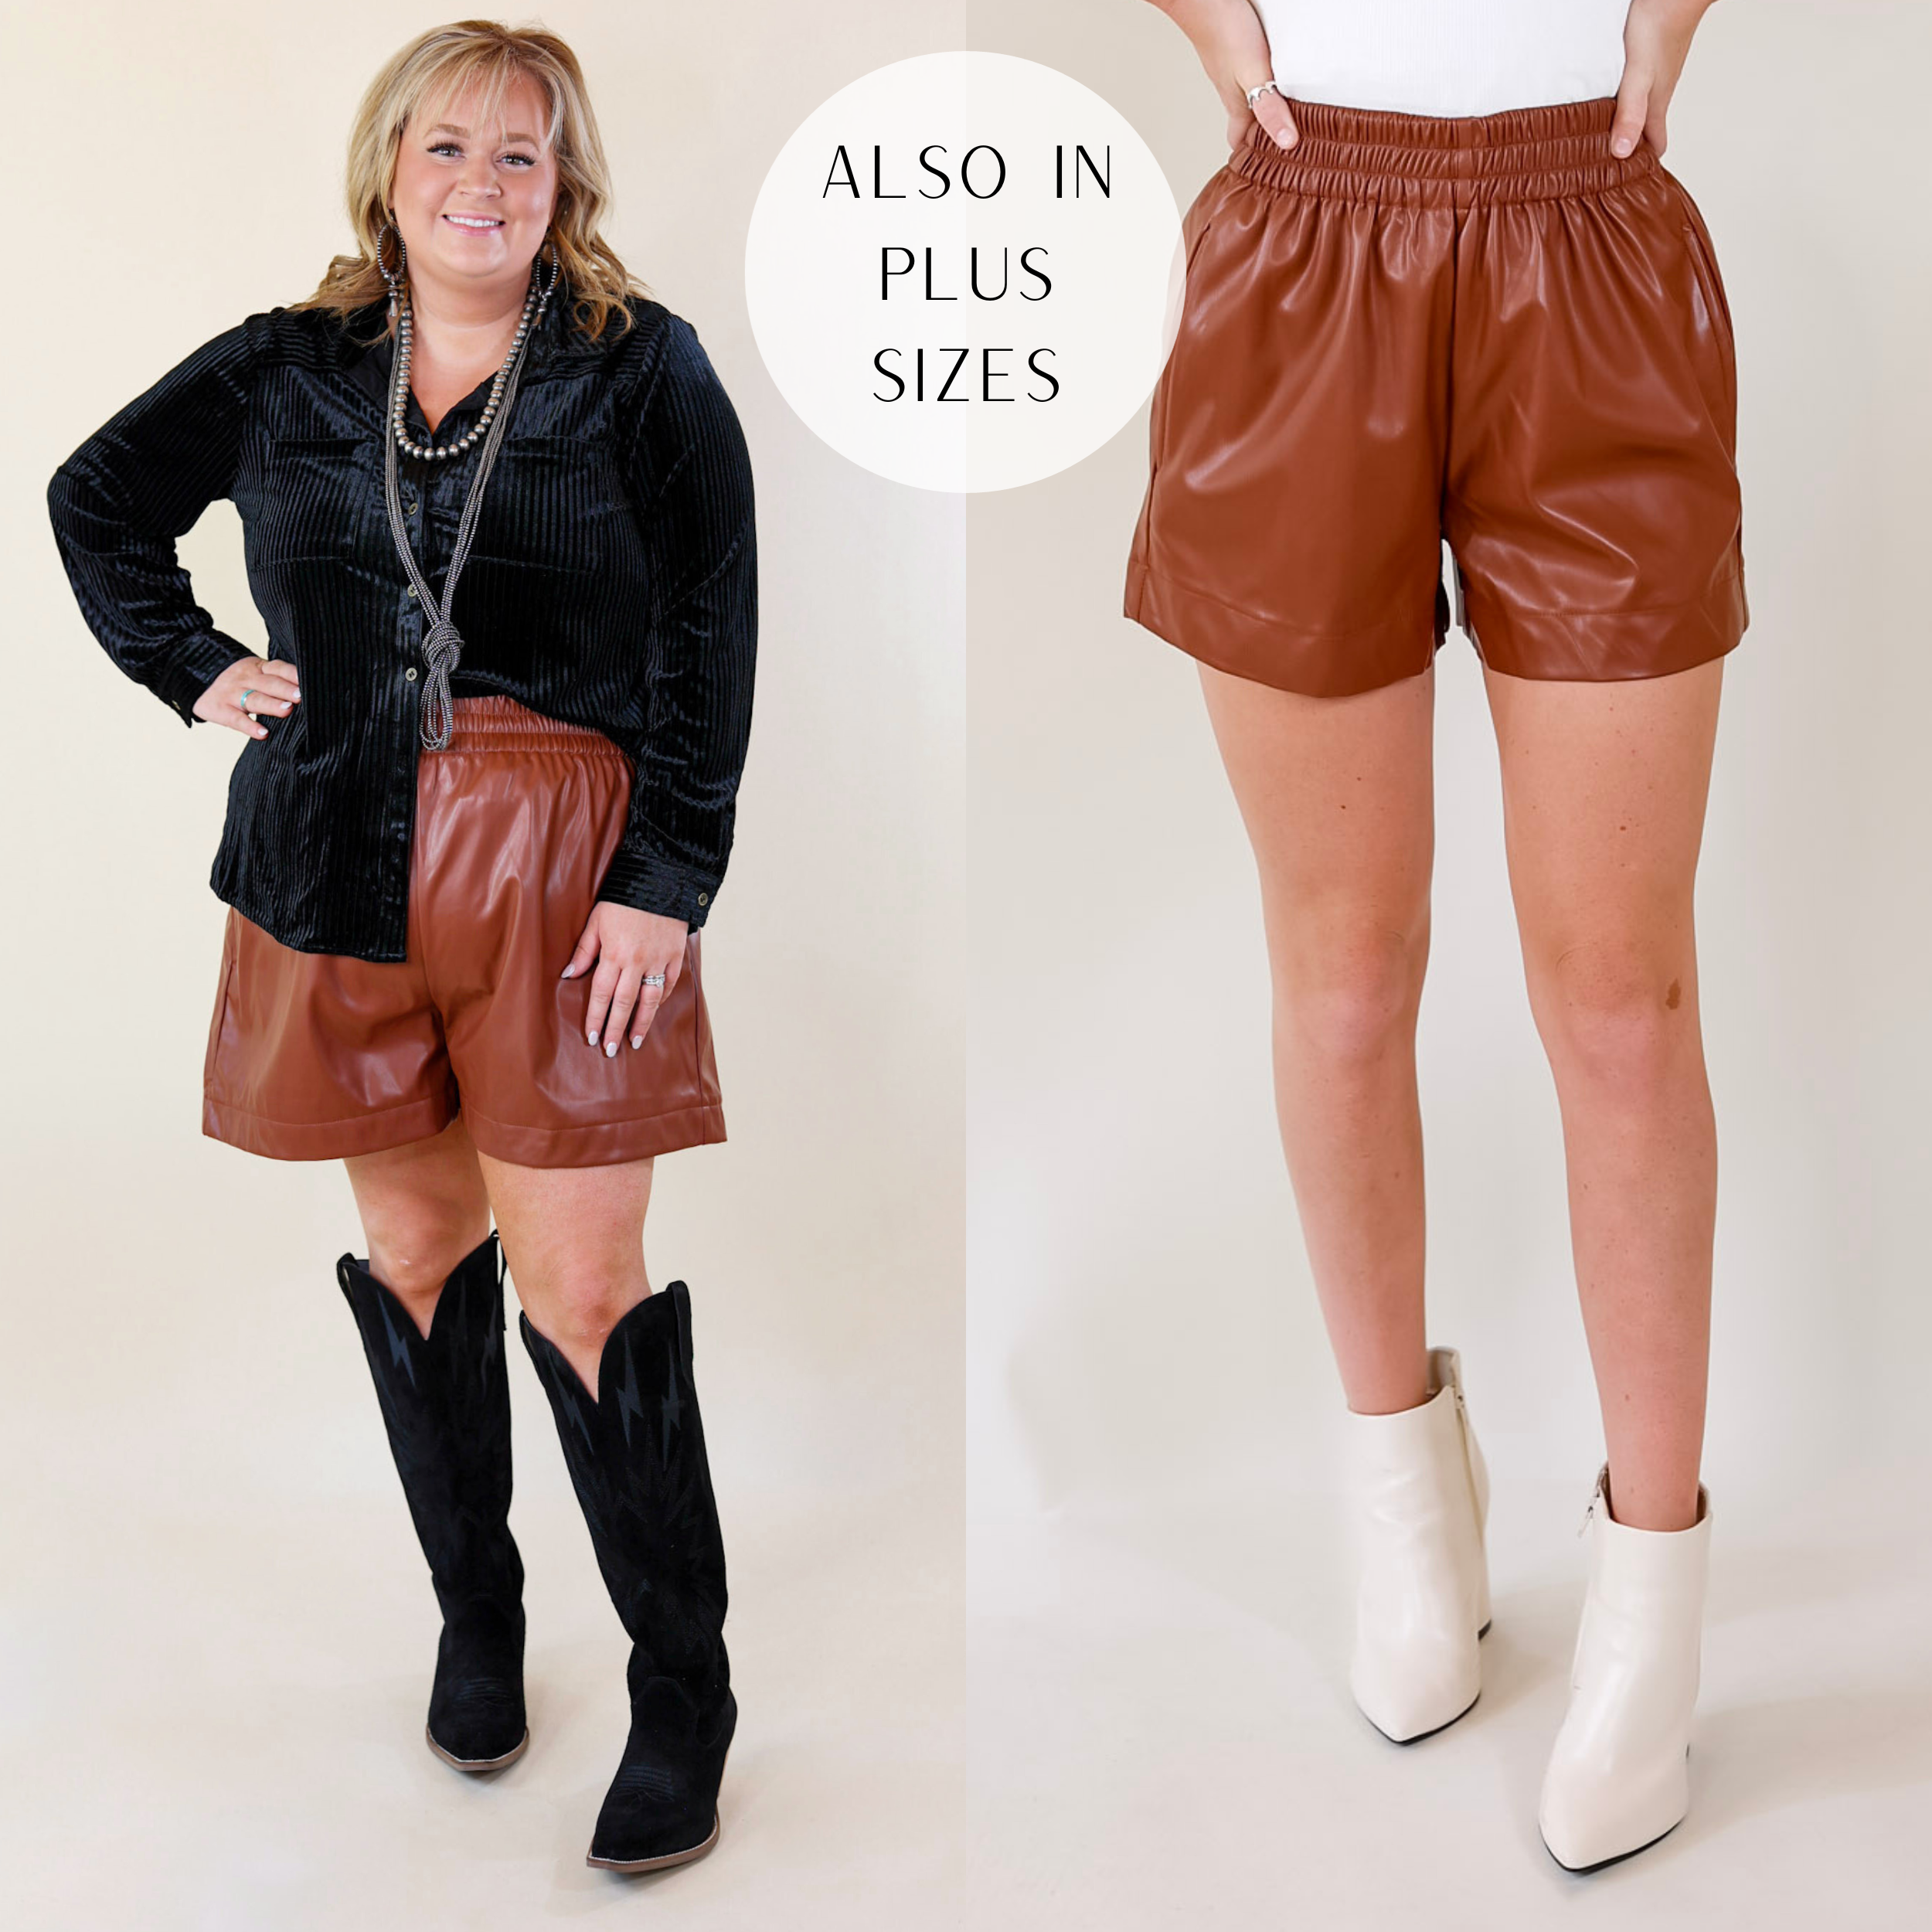 Model is wearing a pair of brown faux leather shorts featuring a stretchy waistband and a pleated design.